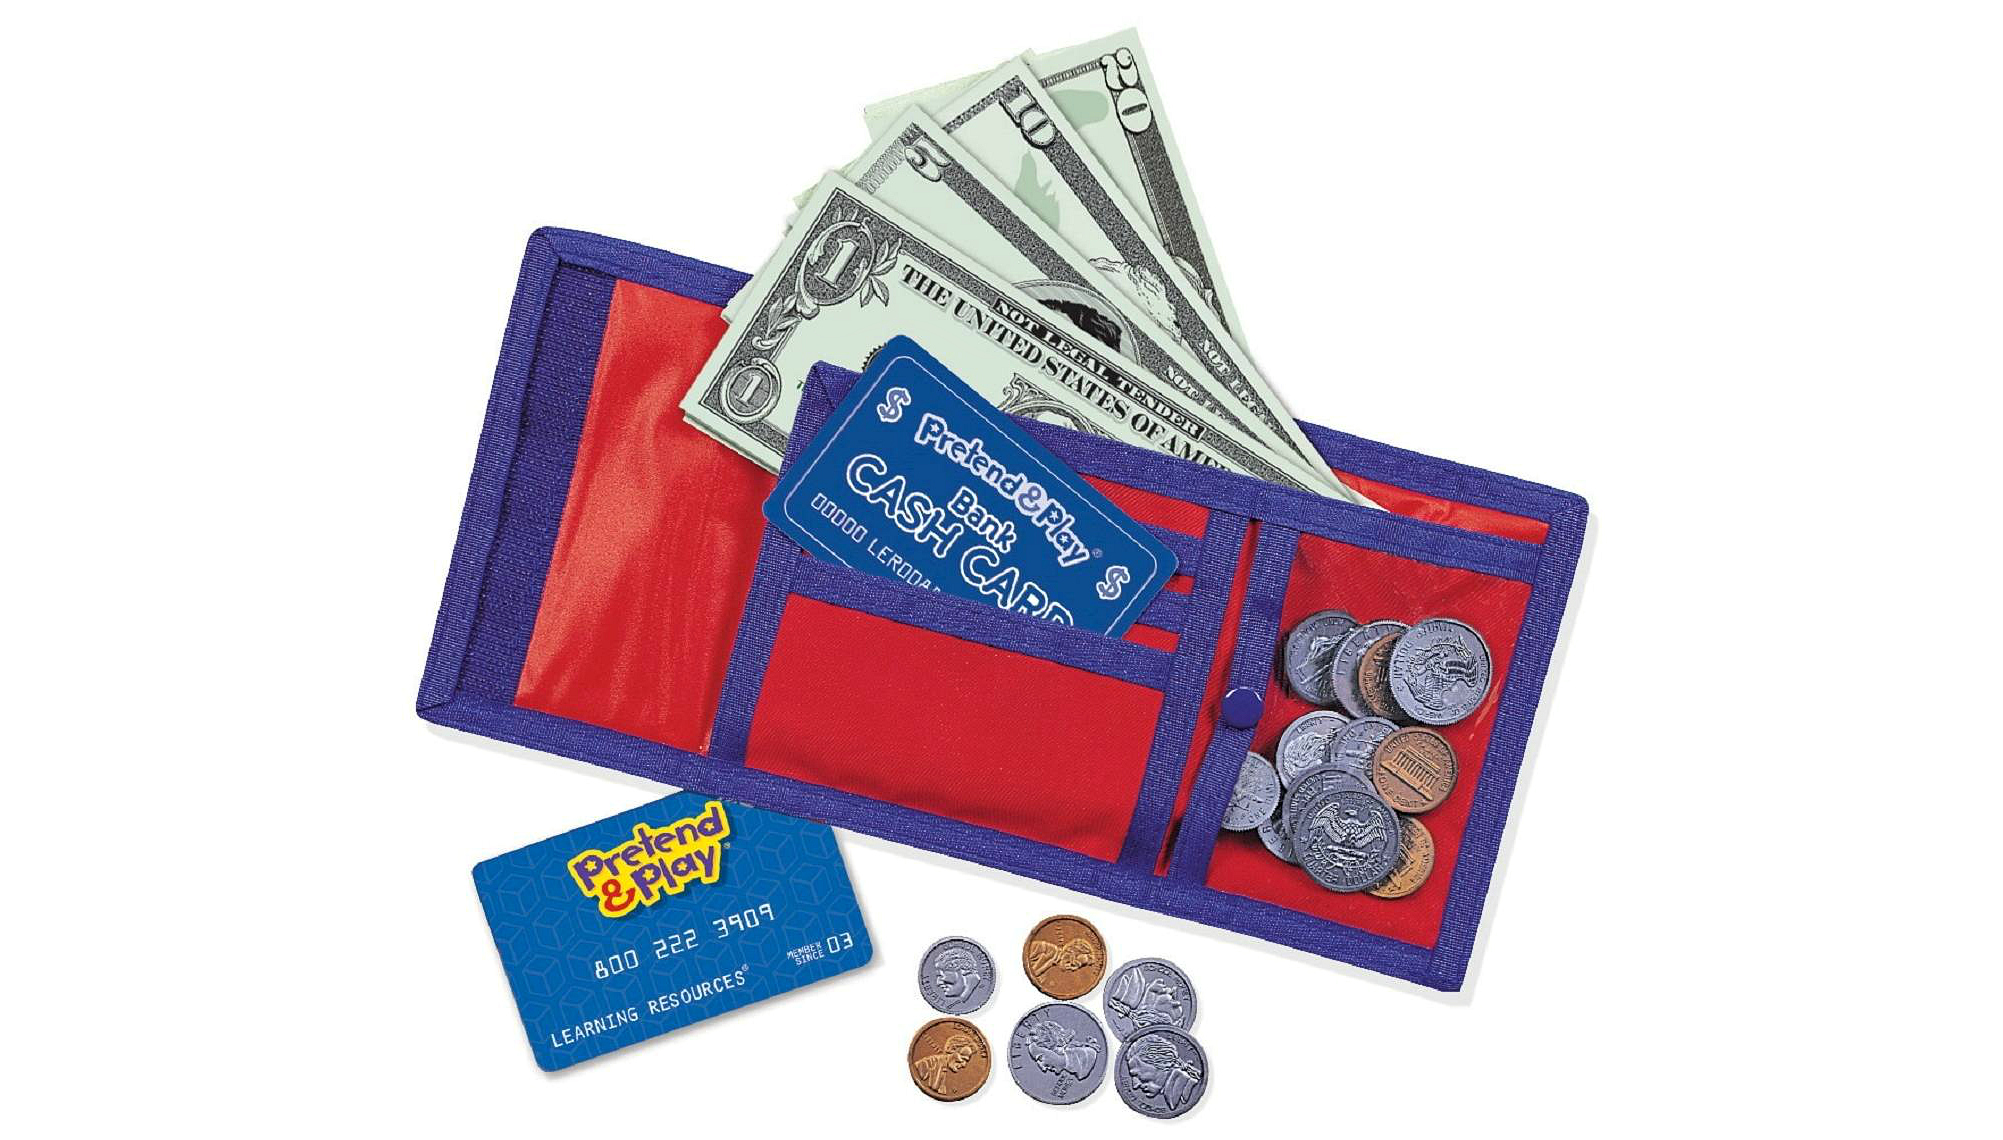 Pretend & Play cash and carry wallet with fake money